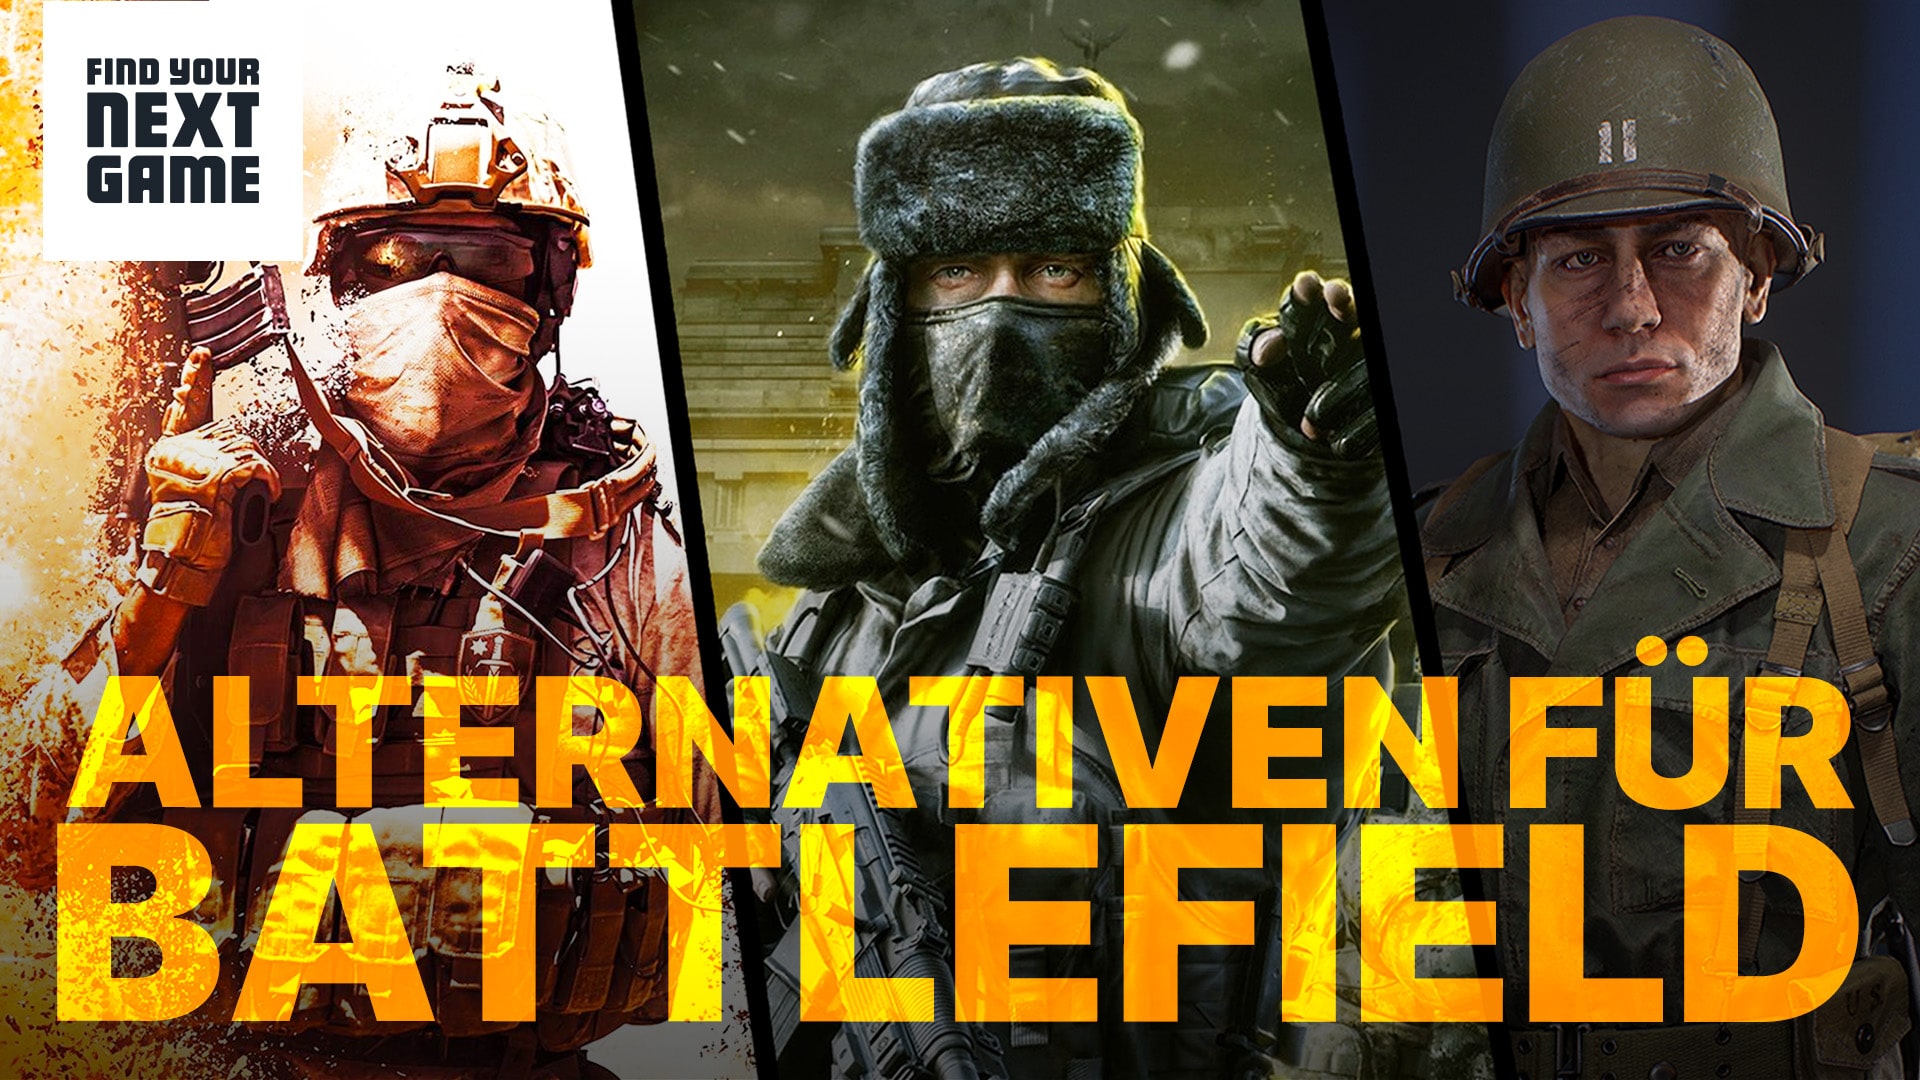 3 popular alternatives for shooter fans disappointed by Battlefield 2042